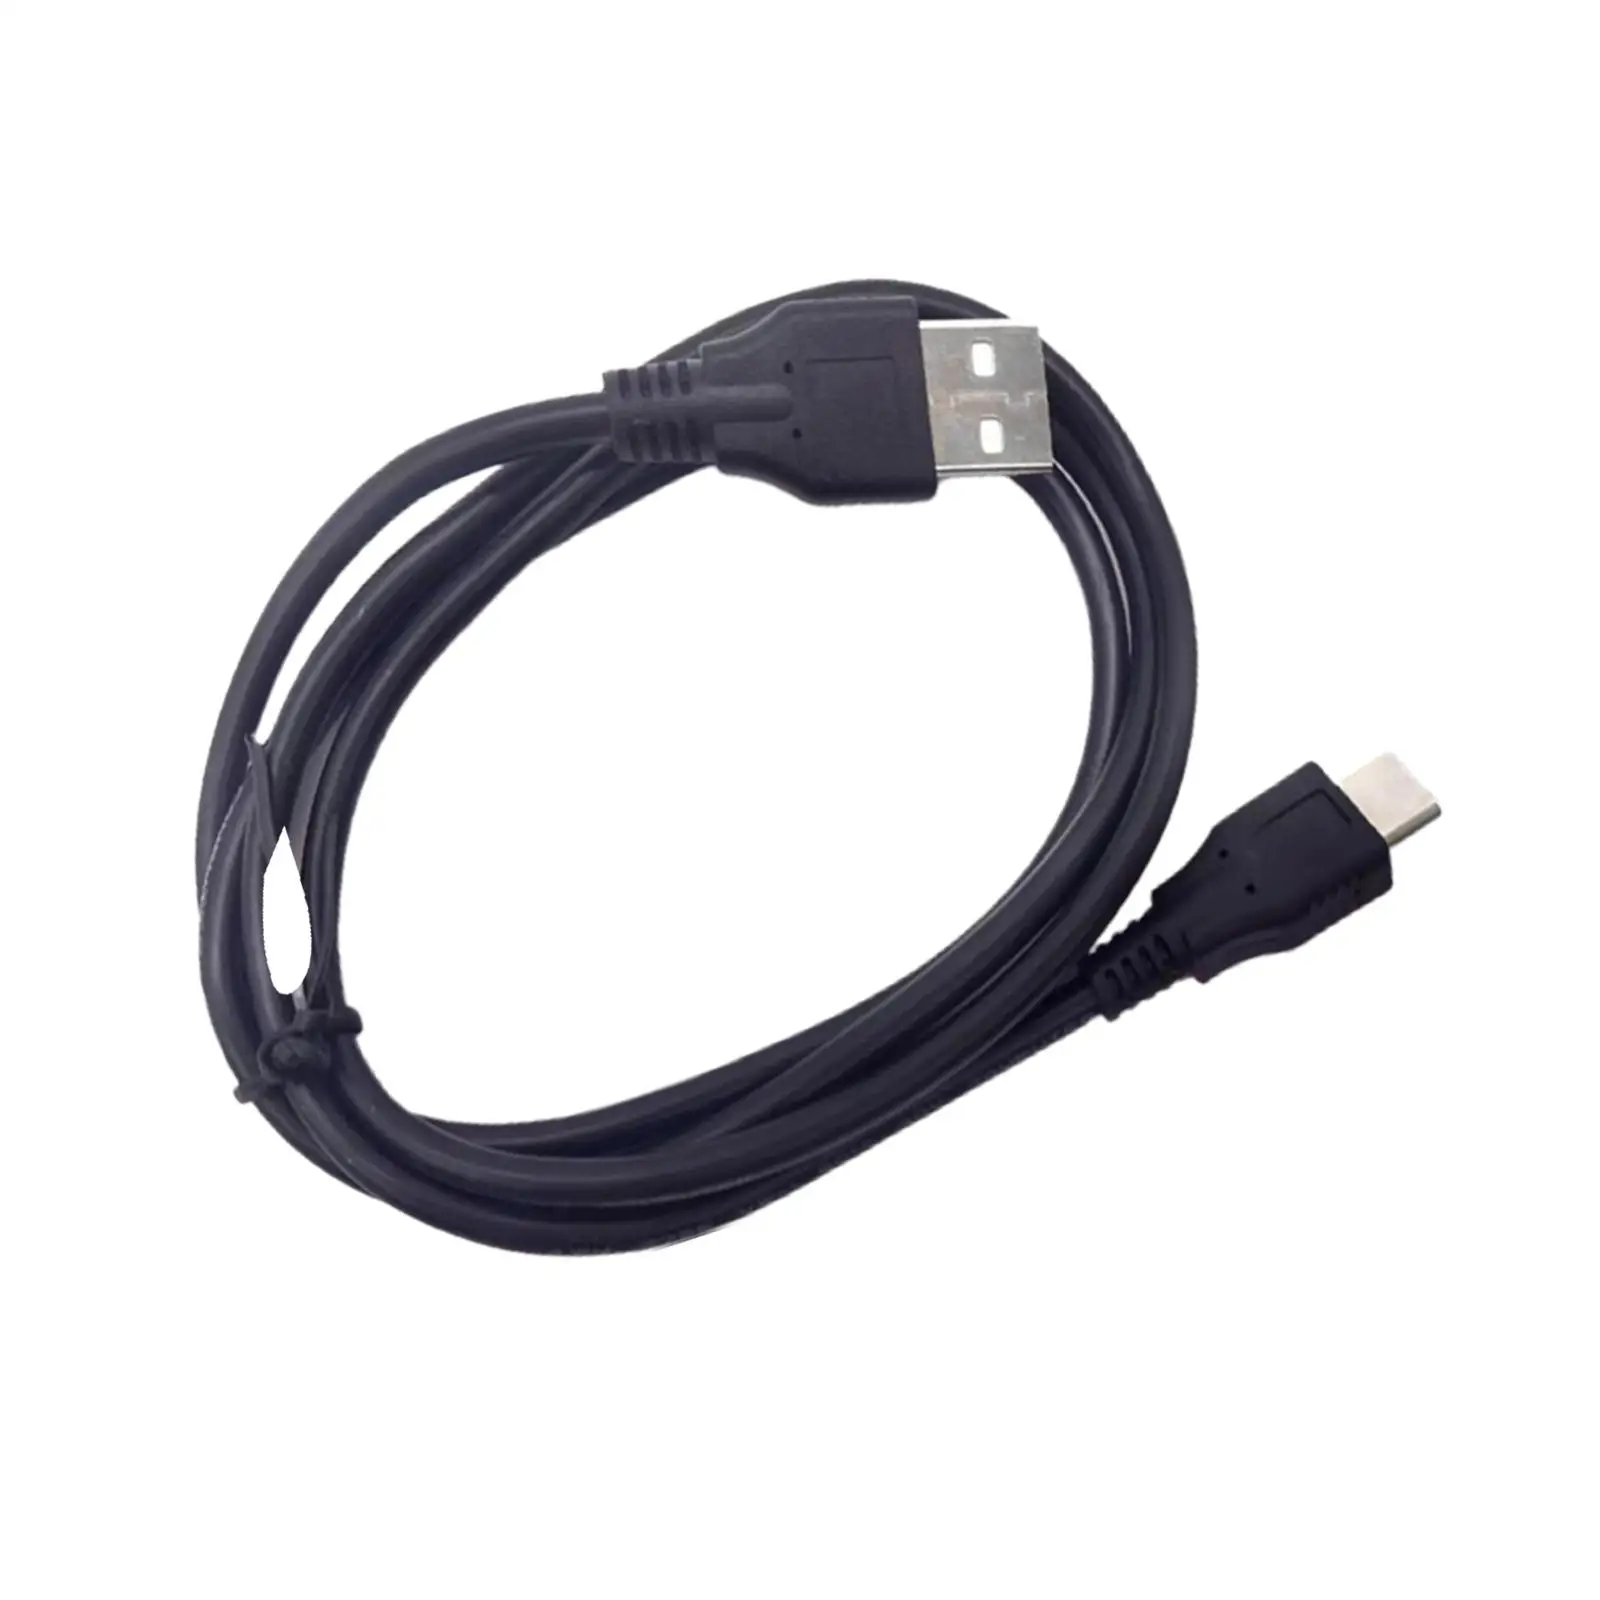 Camera USB Cable Performance Interface Charging Cable Photo Transfer Cable Transfer Wire for Z6 Z7 Uc-e24 Accessories